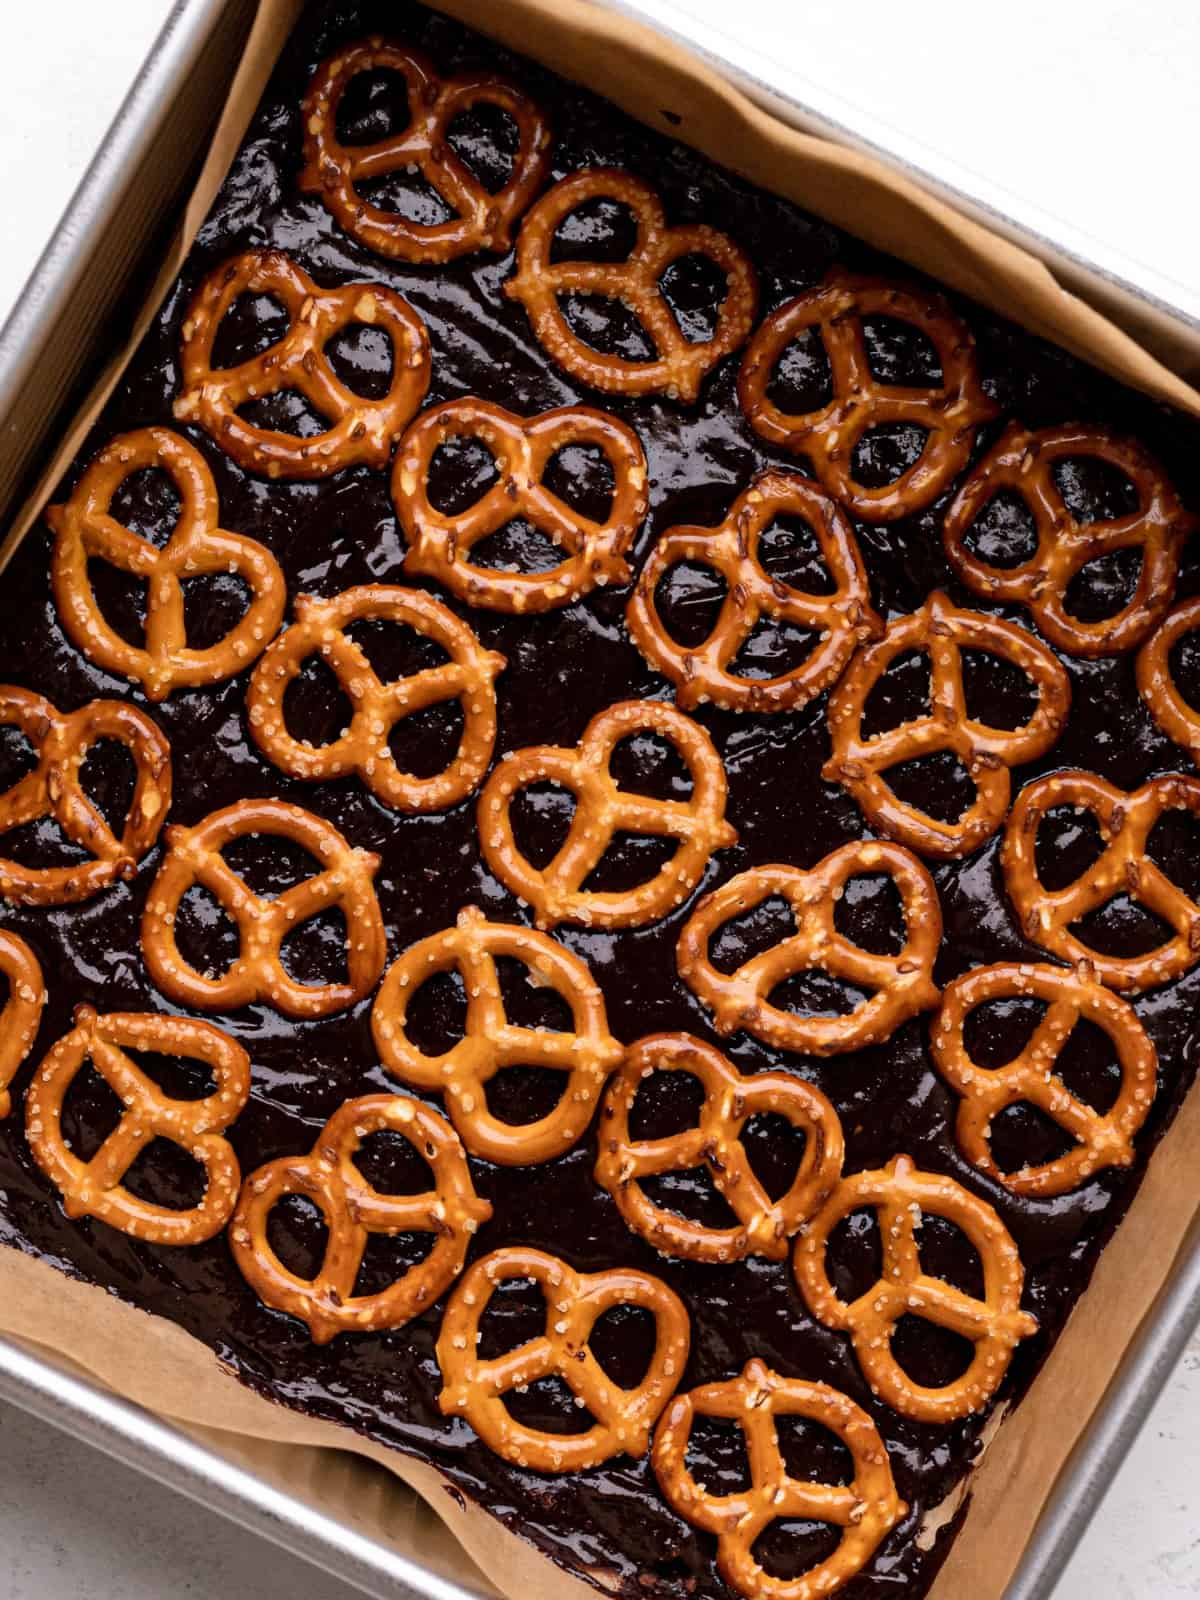 mini pretzels layered on top of brownie batter in a baking pan.